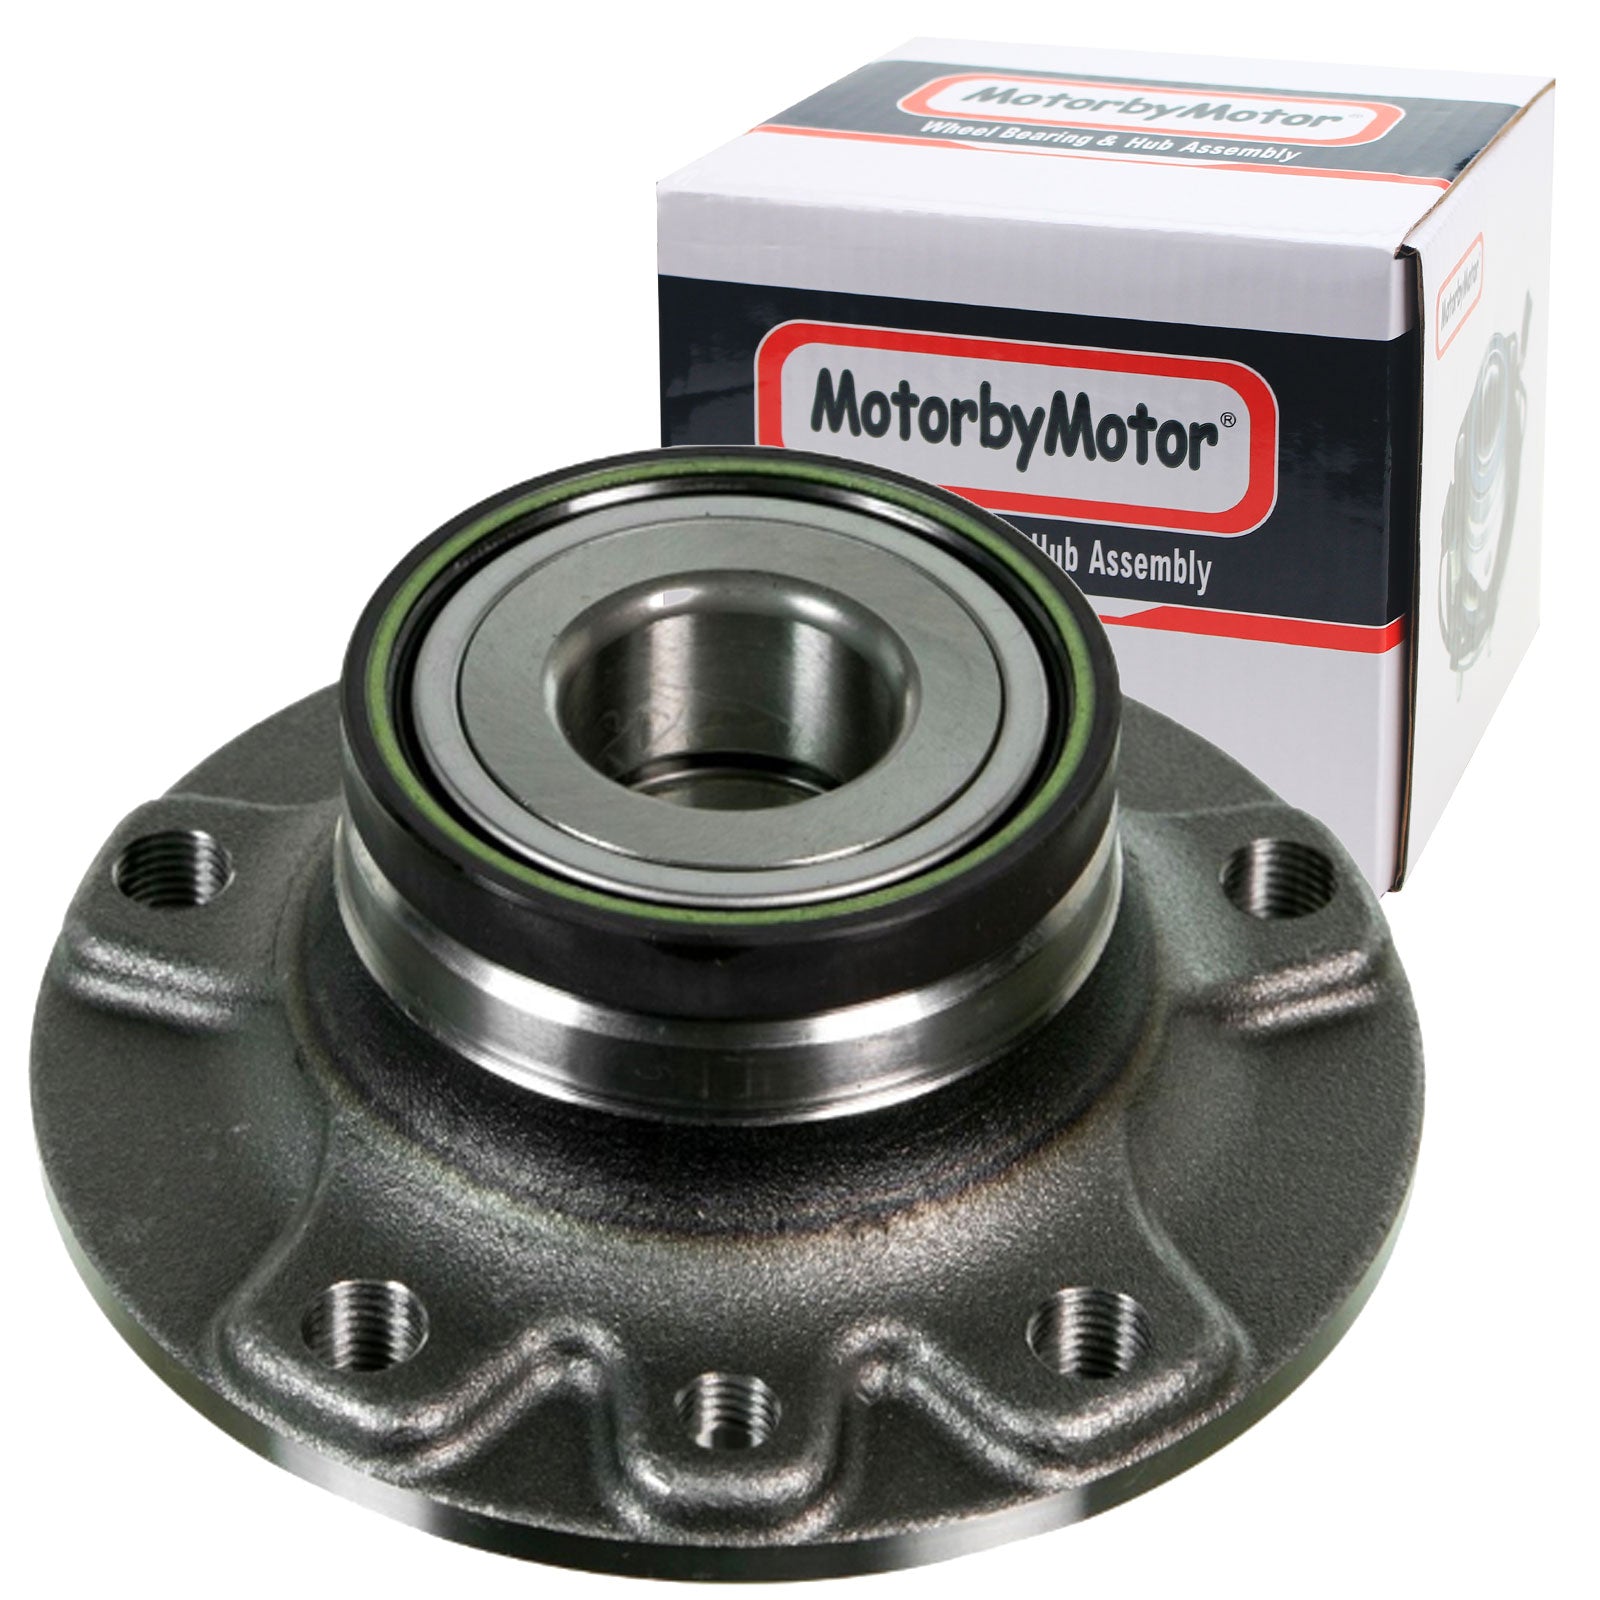 MotorbyMotor 512510 Rear Wheel Bearing and Hub Assembly fits for Dodge Dart (Fit Only Engine:1.4L/2.0L/2.4L) Low-Runout OE Directly Replacement Hub Bearing MotorbyMotor